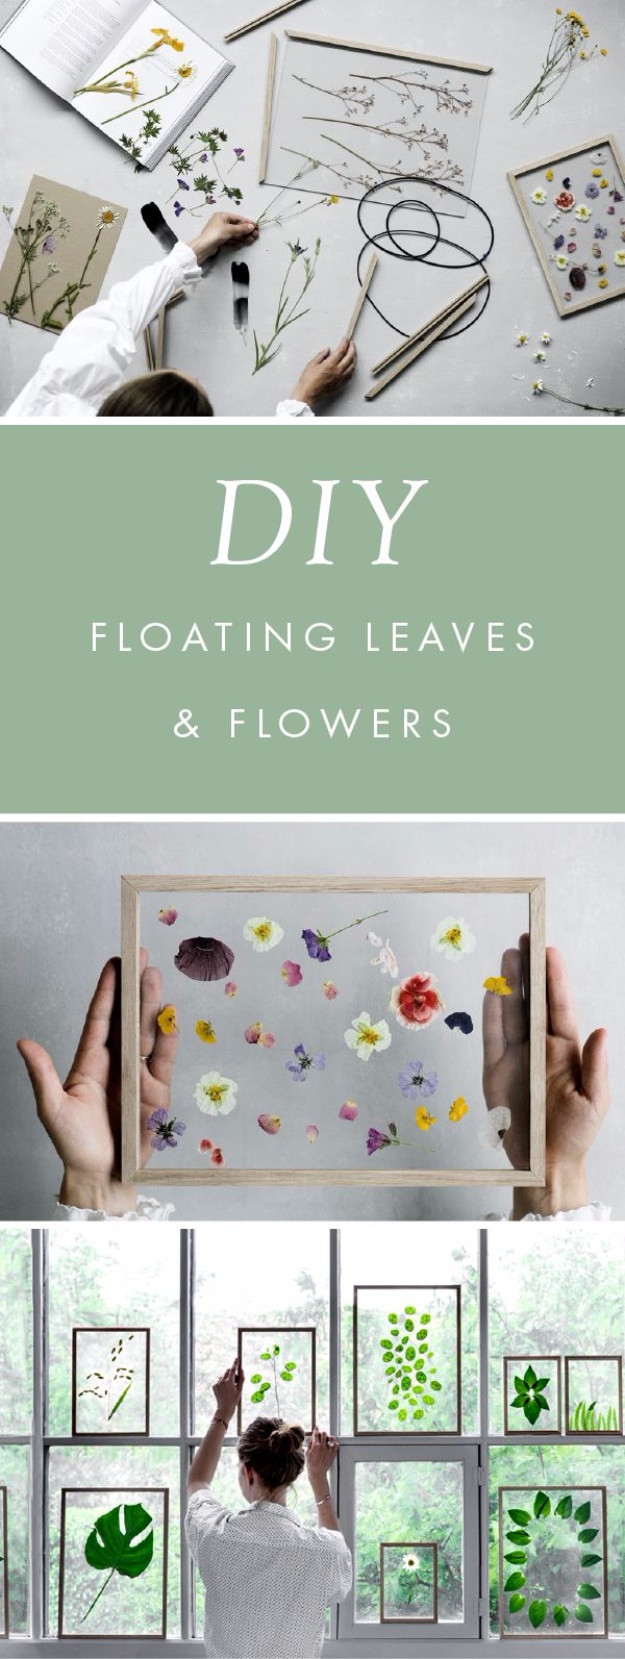 DIY Gift for the Office - DIY Floating Leaves And Flowers - DIY Gift Ideas for Your Boss and Coworkers - Cheap and Quick Presents to Make for Office Parties, Secret Santa Gifts - Cool Mason Jar Ideas, Creative Gift Baskets and Easy Office Christmas Presents